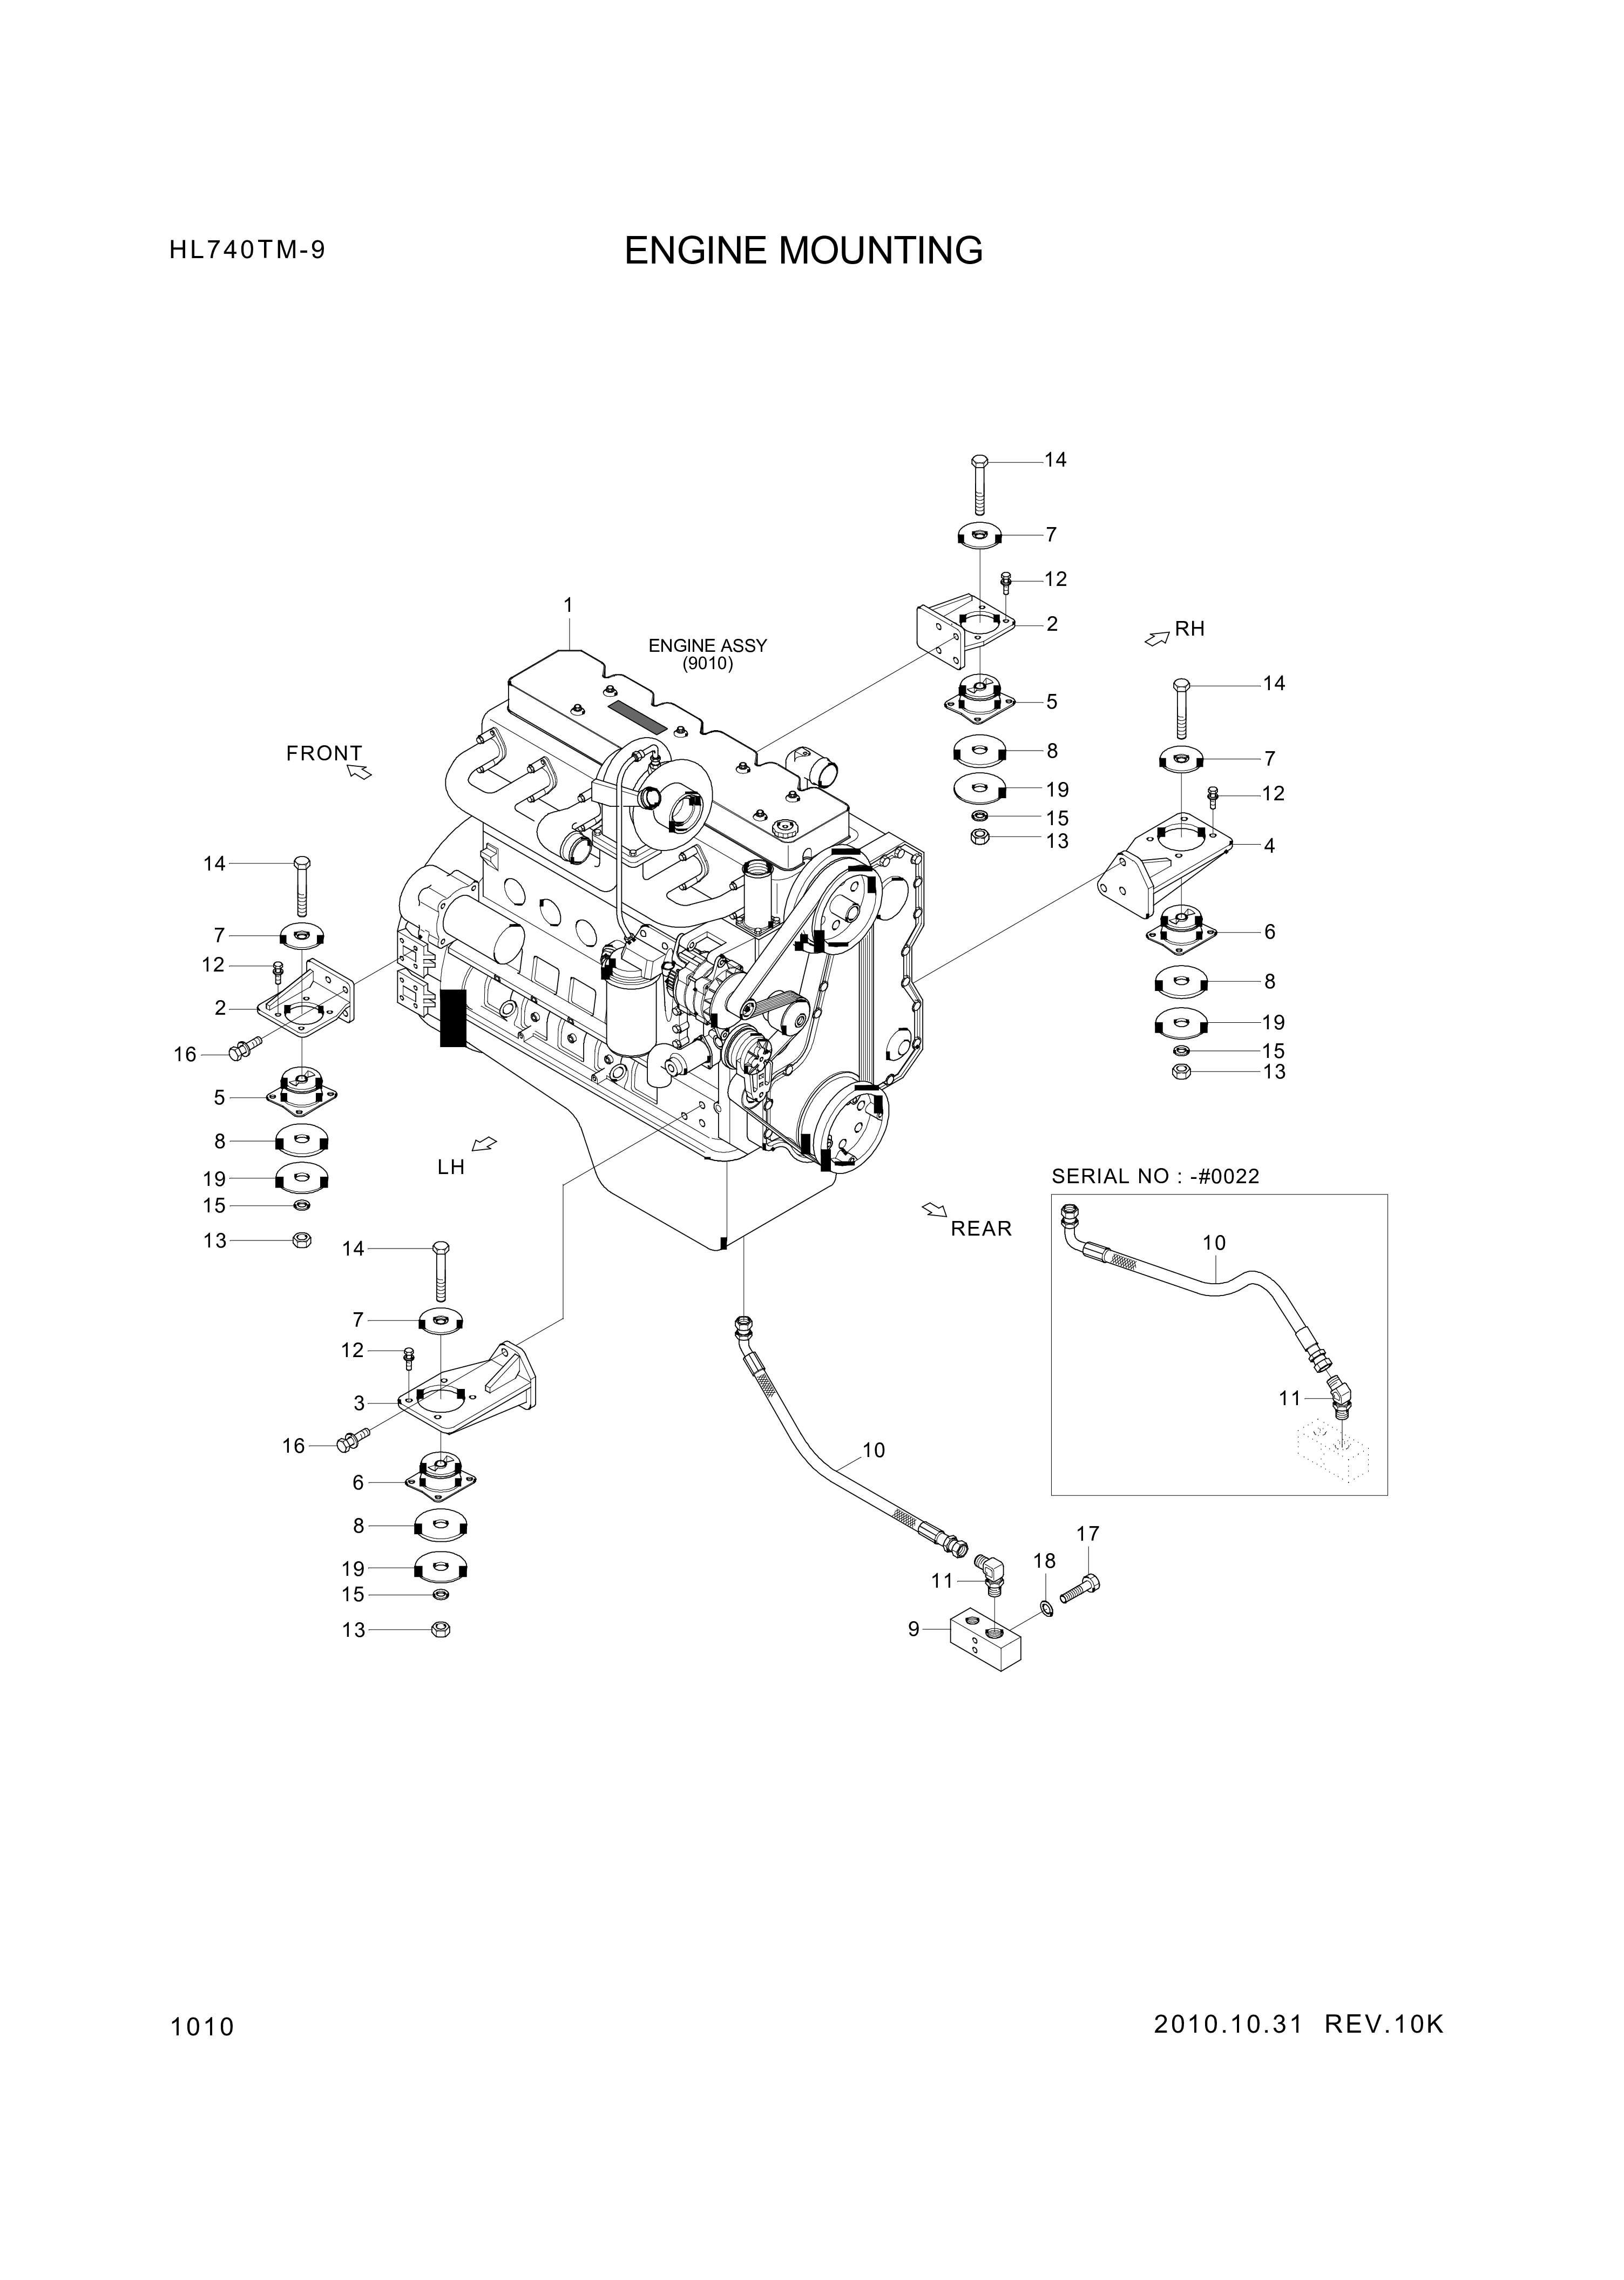 drawing for Hyundai Construction Equipment 11LN-00010 - ENGINE ASSY (figure 1)